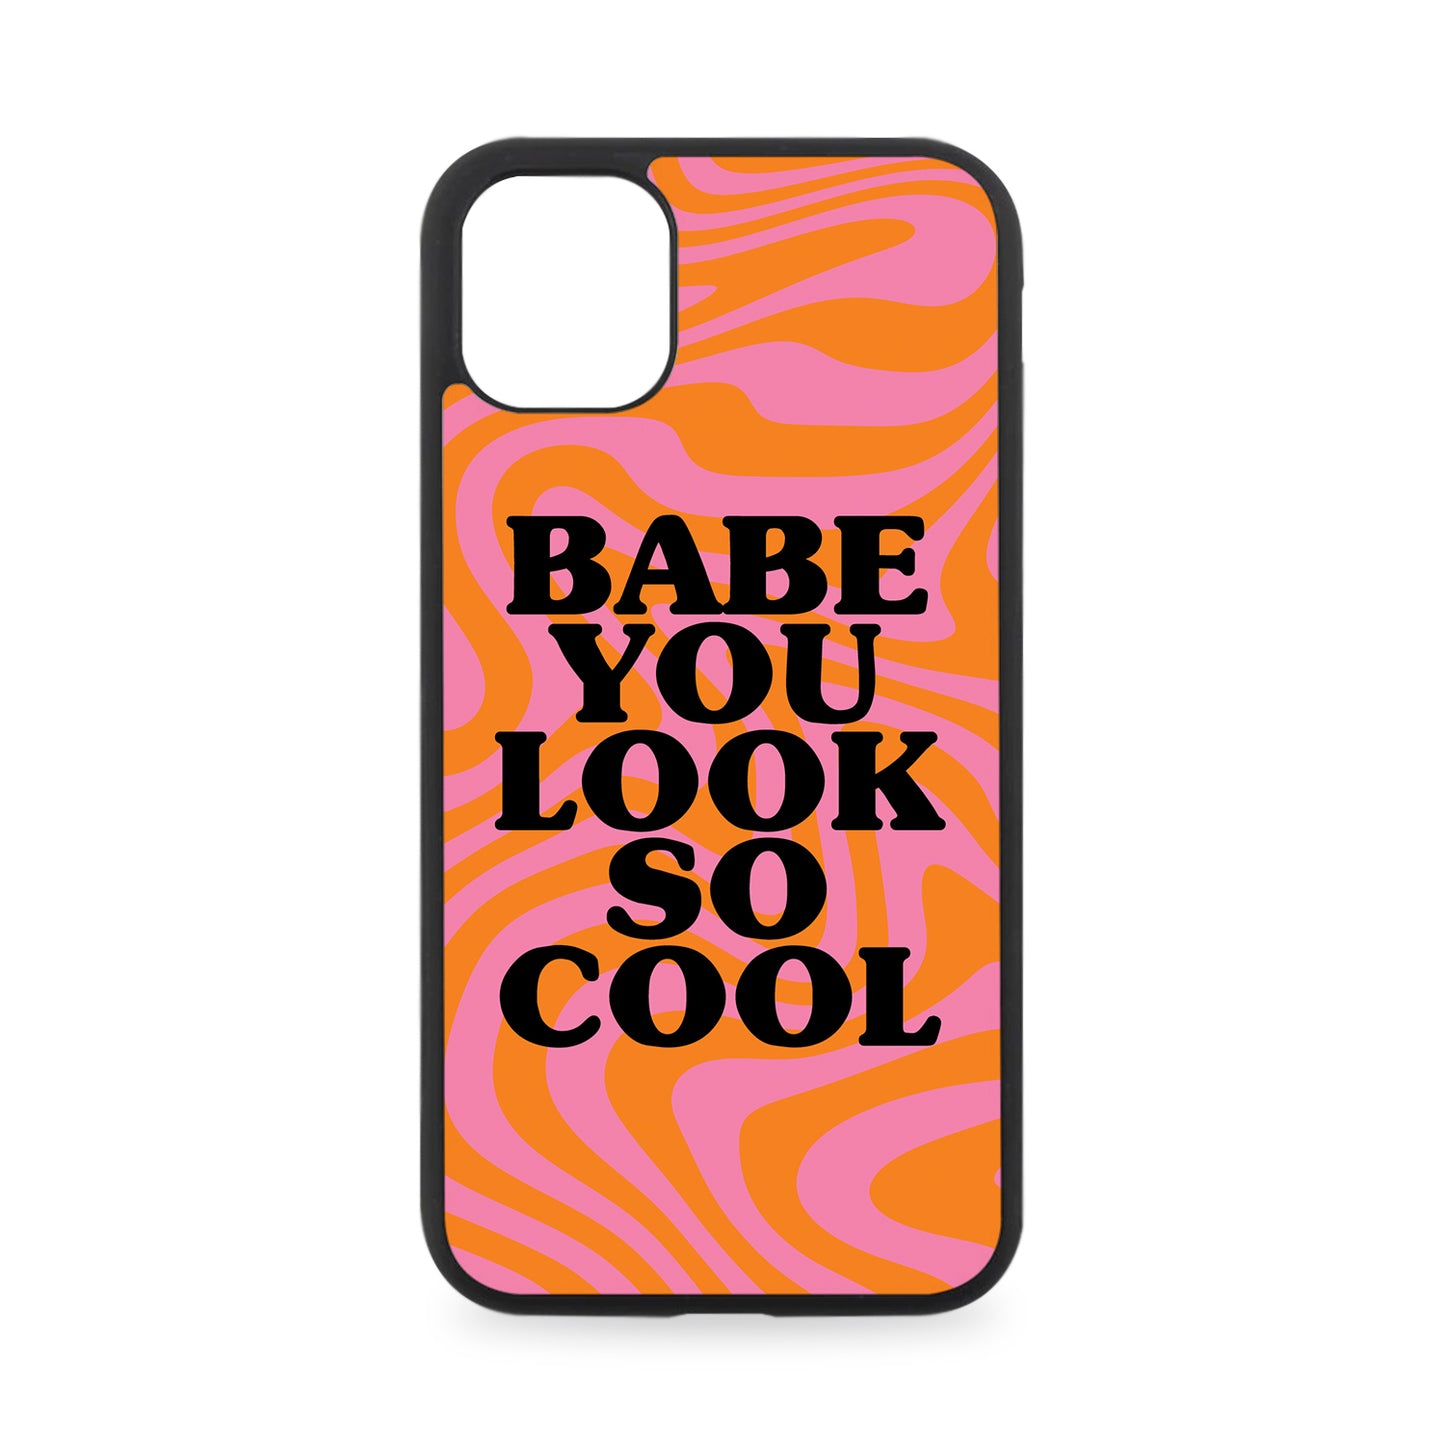 BABE YOU LOOK SO COOL RUBBER PHONE CASE